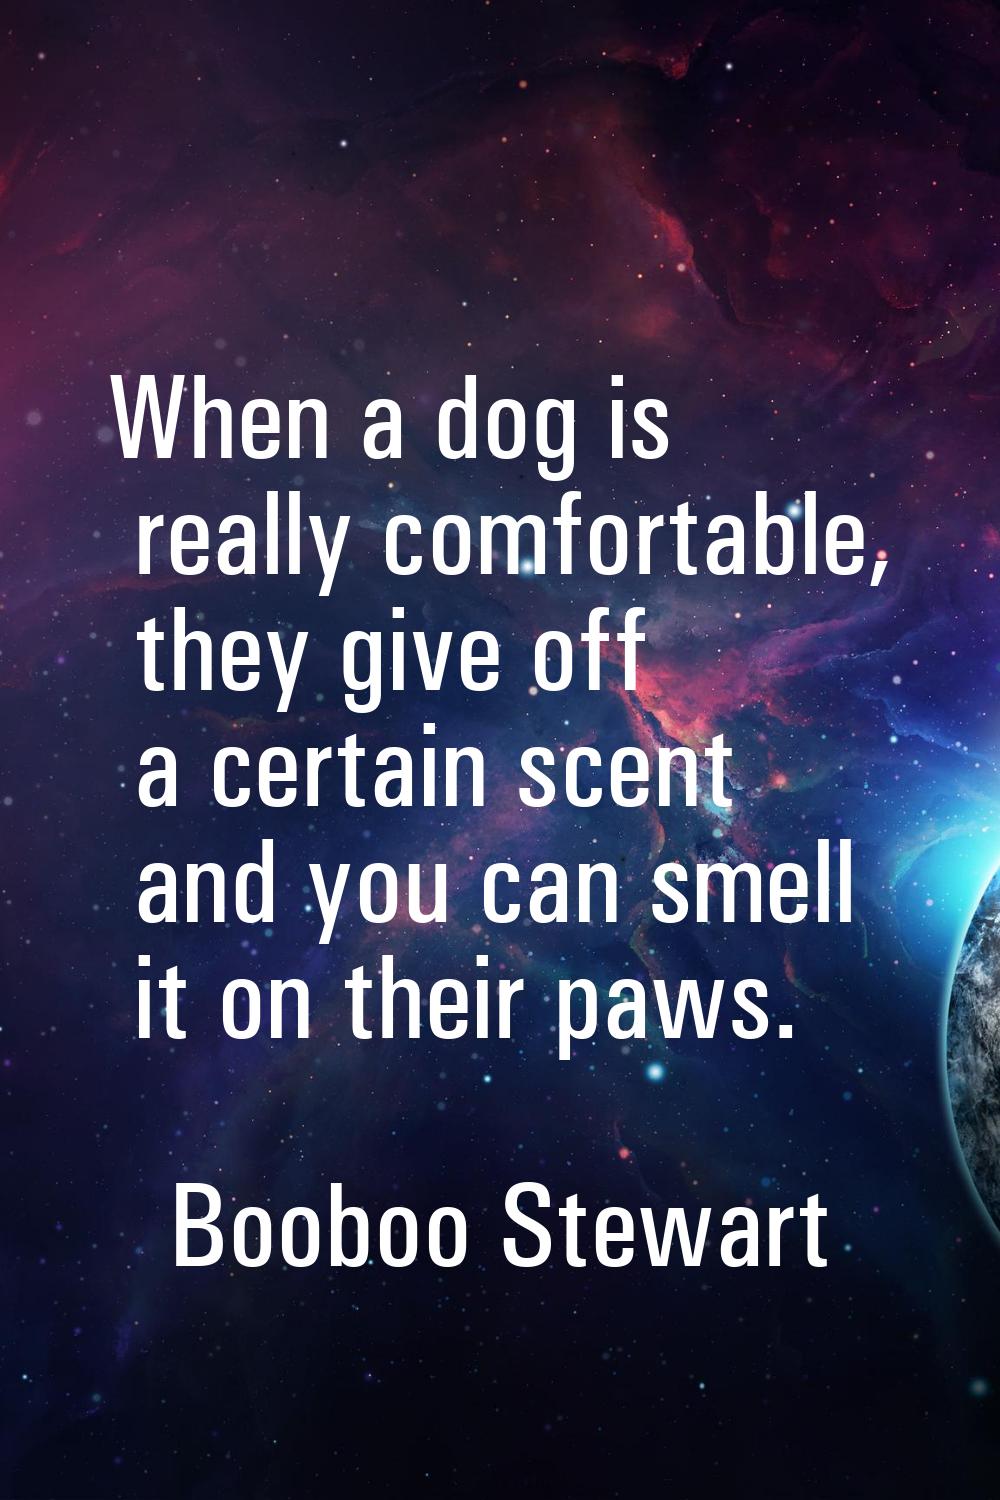 When a dog is really comfortable, they give off a certain scent and you can smell it on their paws.